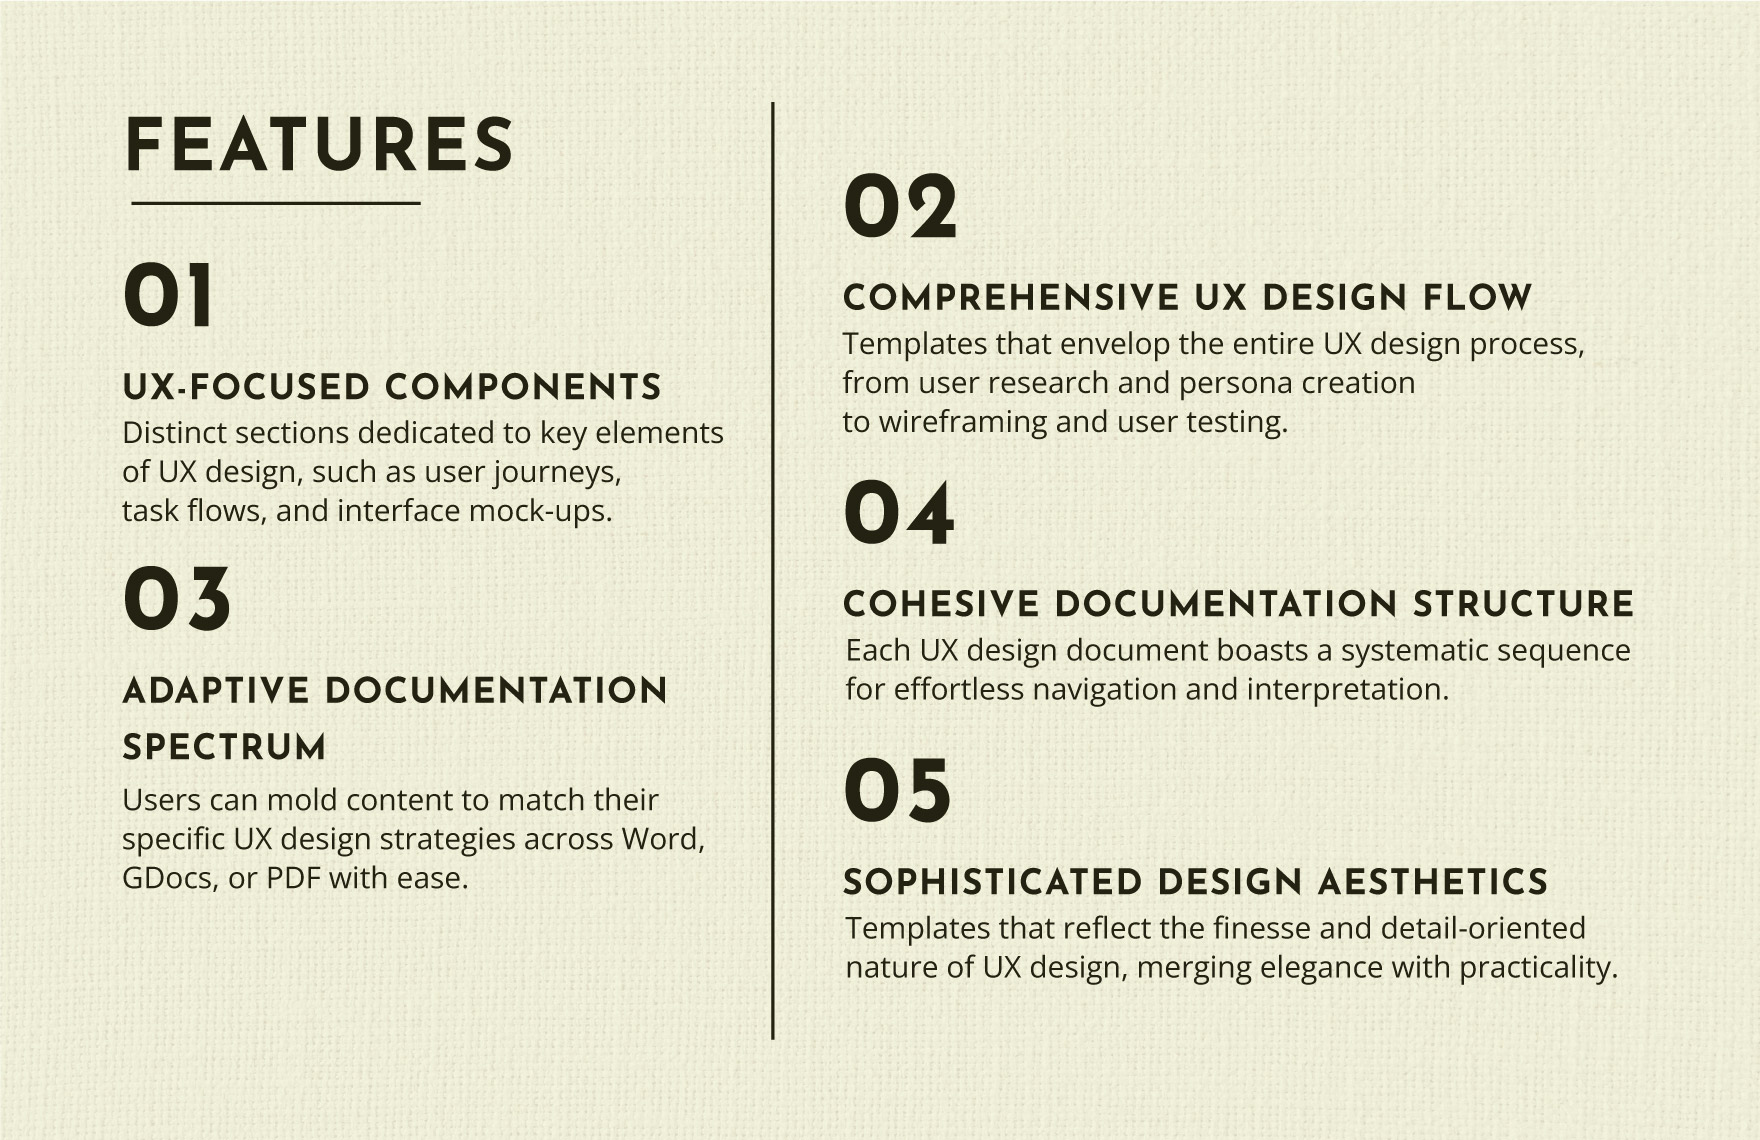 IT UX Persona Creation Template